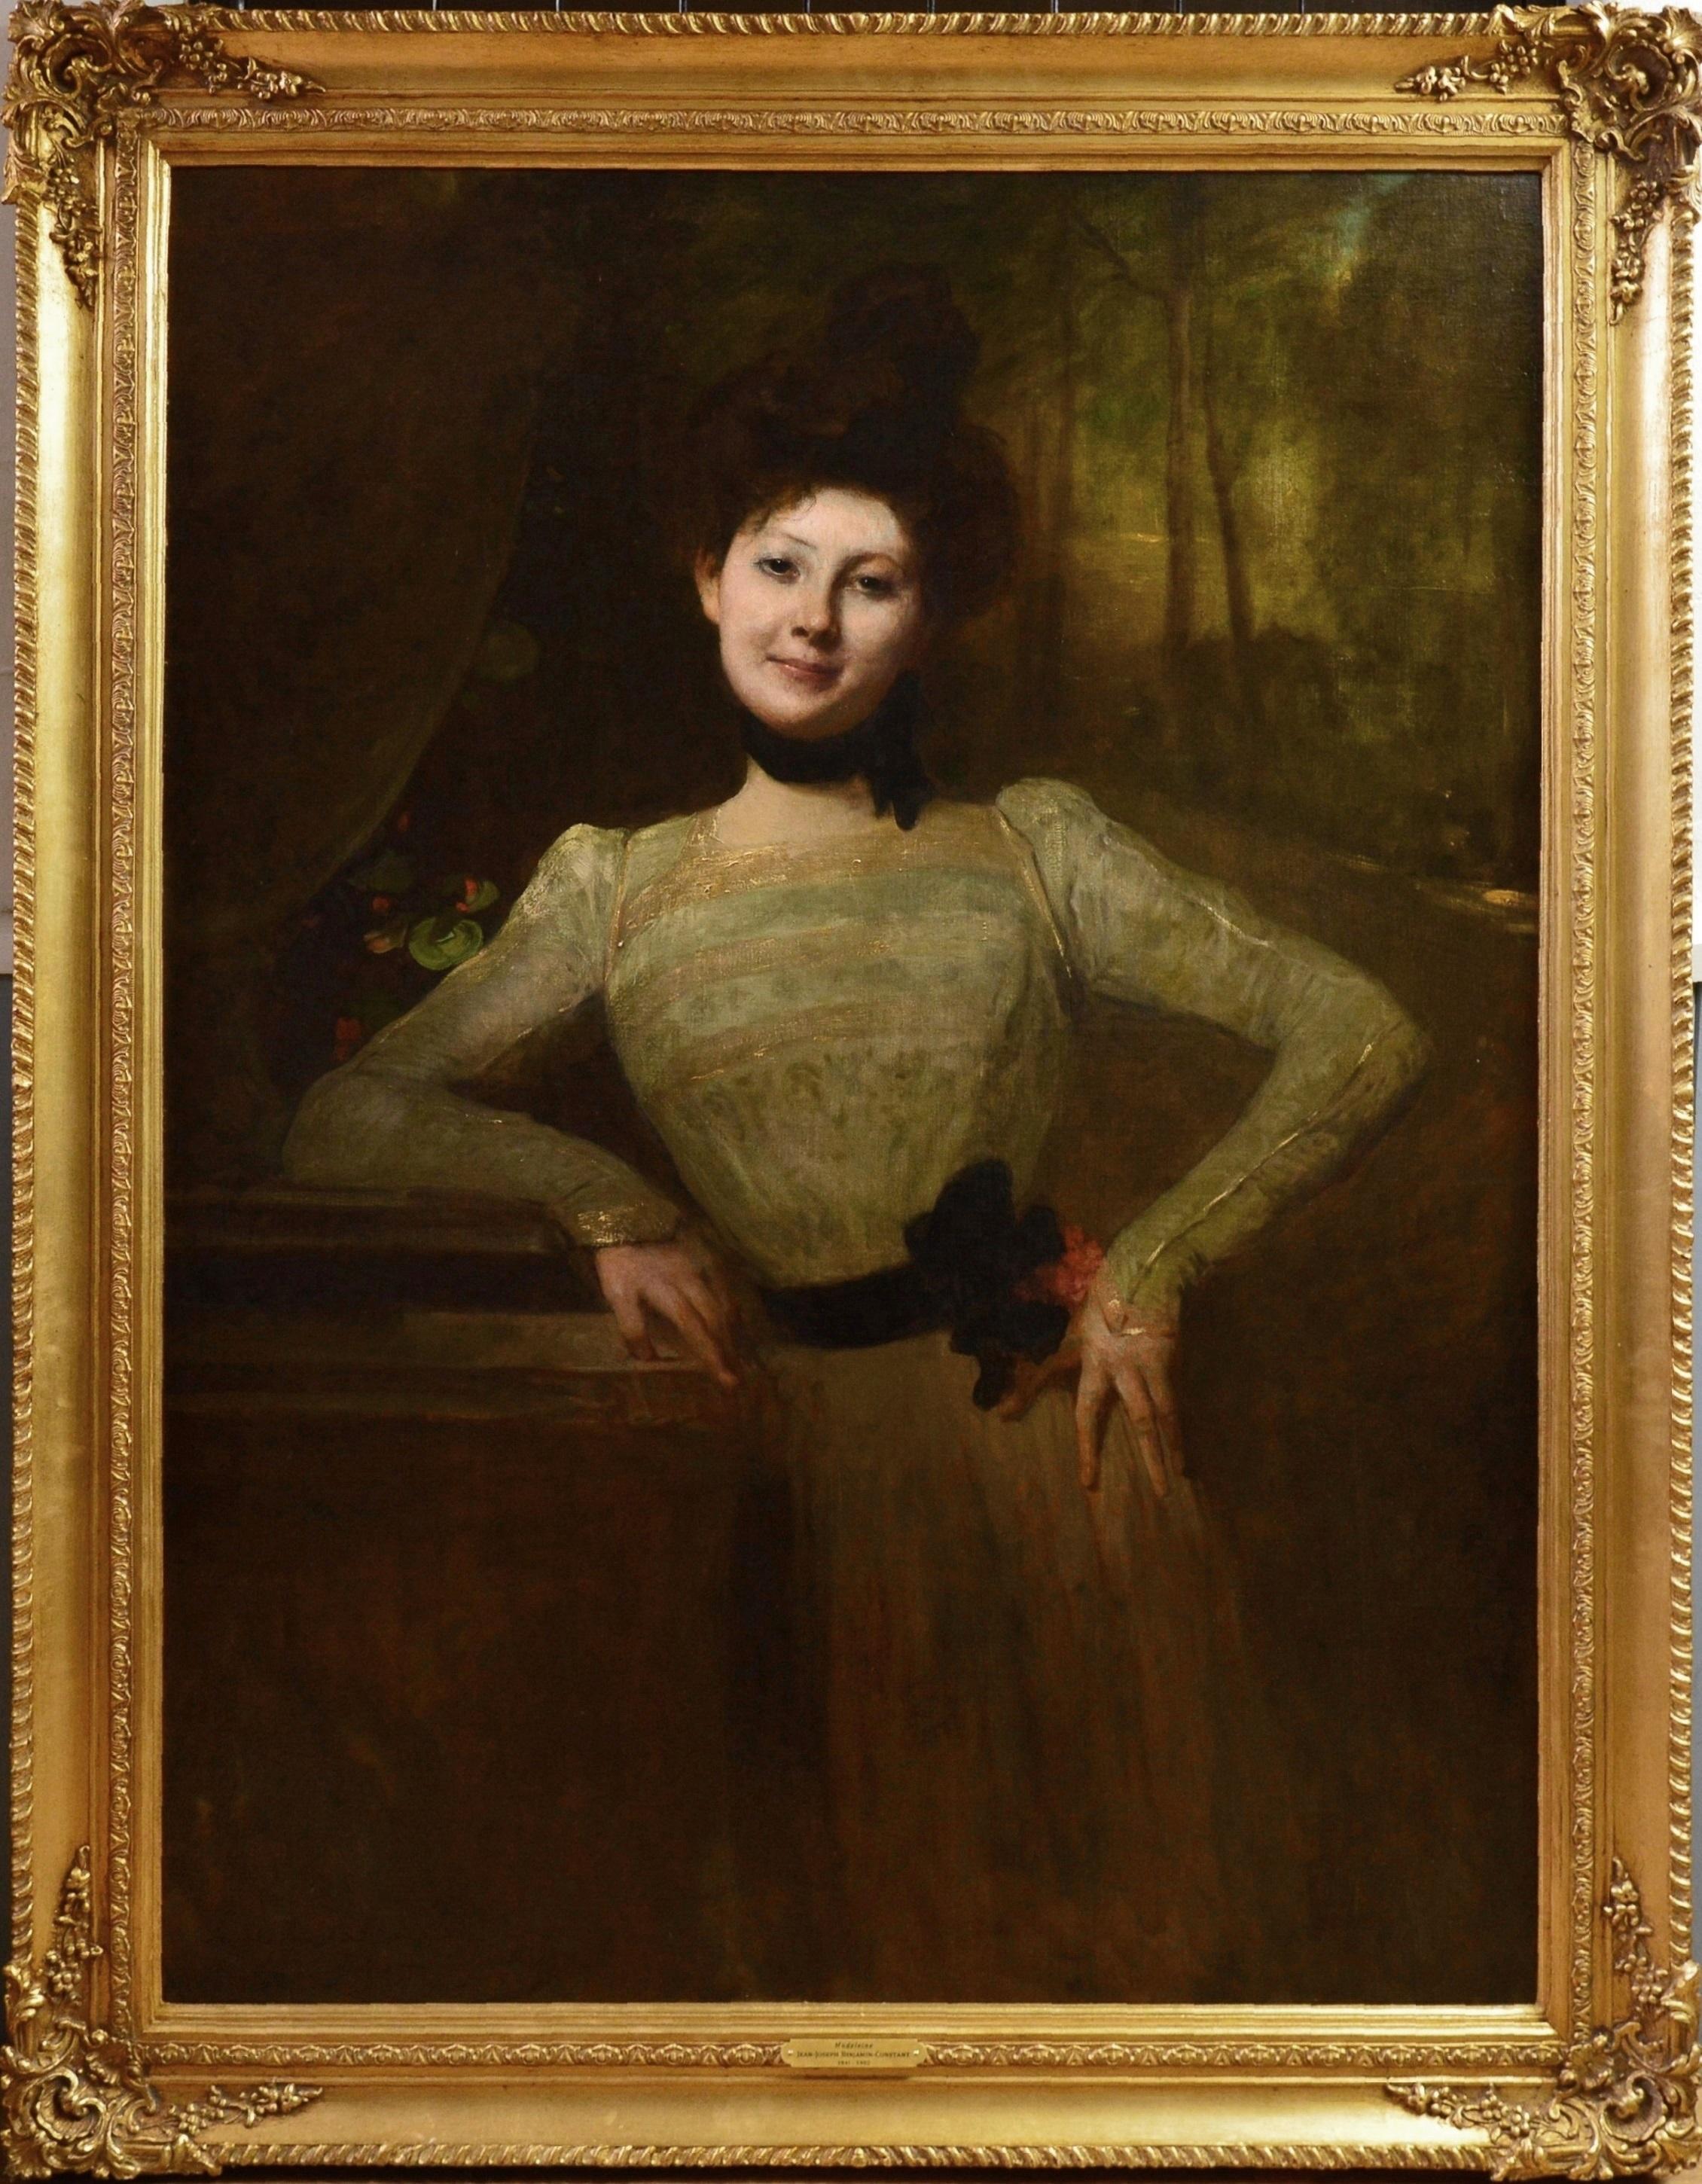 Jean-Joseph Benjamin-Constant Portrait Painting - Madeleine - Very Large Portrait of Young Beauty Victorian Edwardian Girl 1901